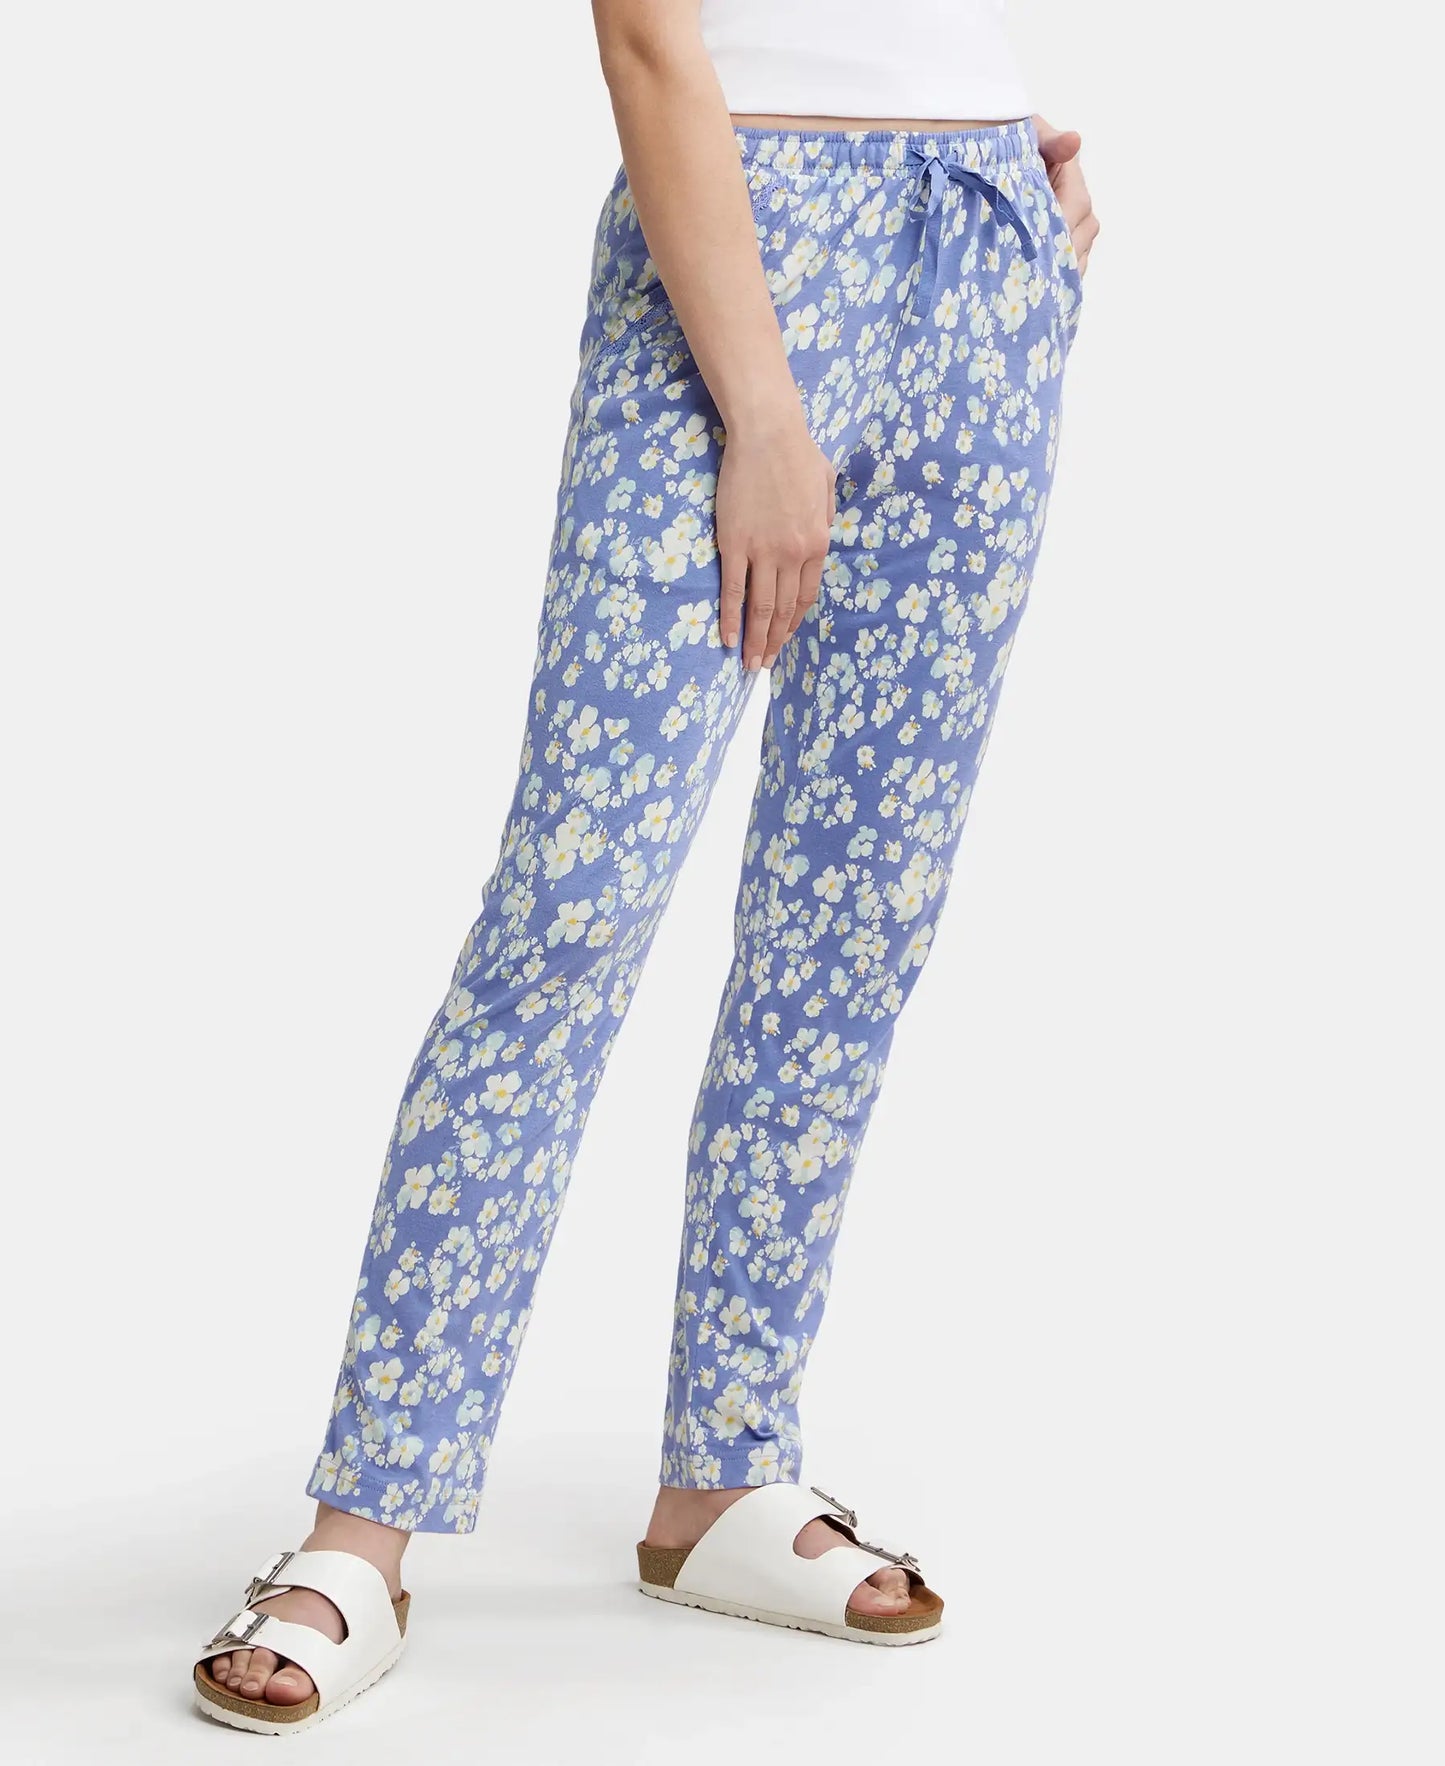 Micro Modal Cotton Relaxed Fit Printed Pyjama with Side Pockets - Iris Blue Assorted Prints-2